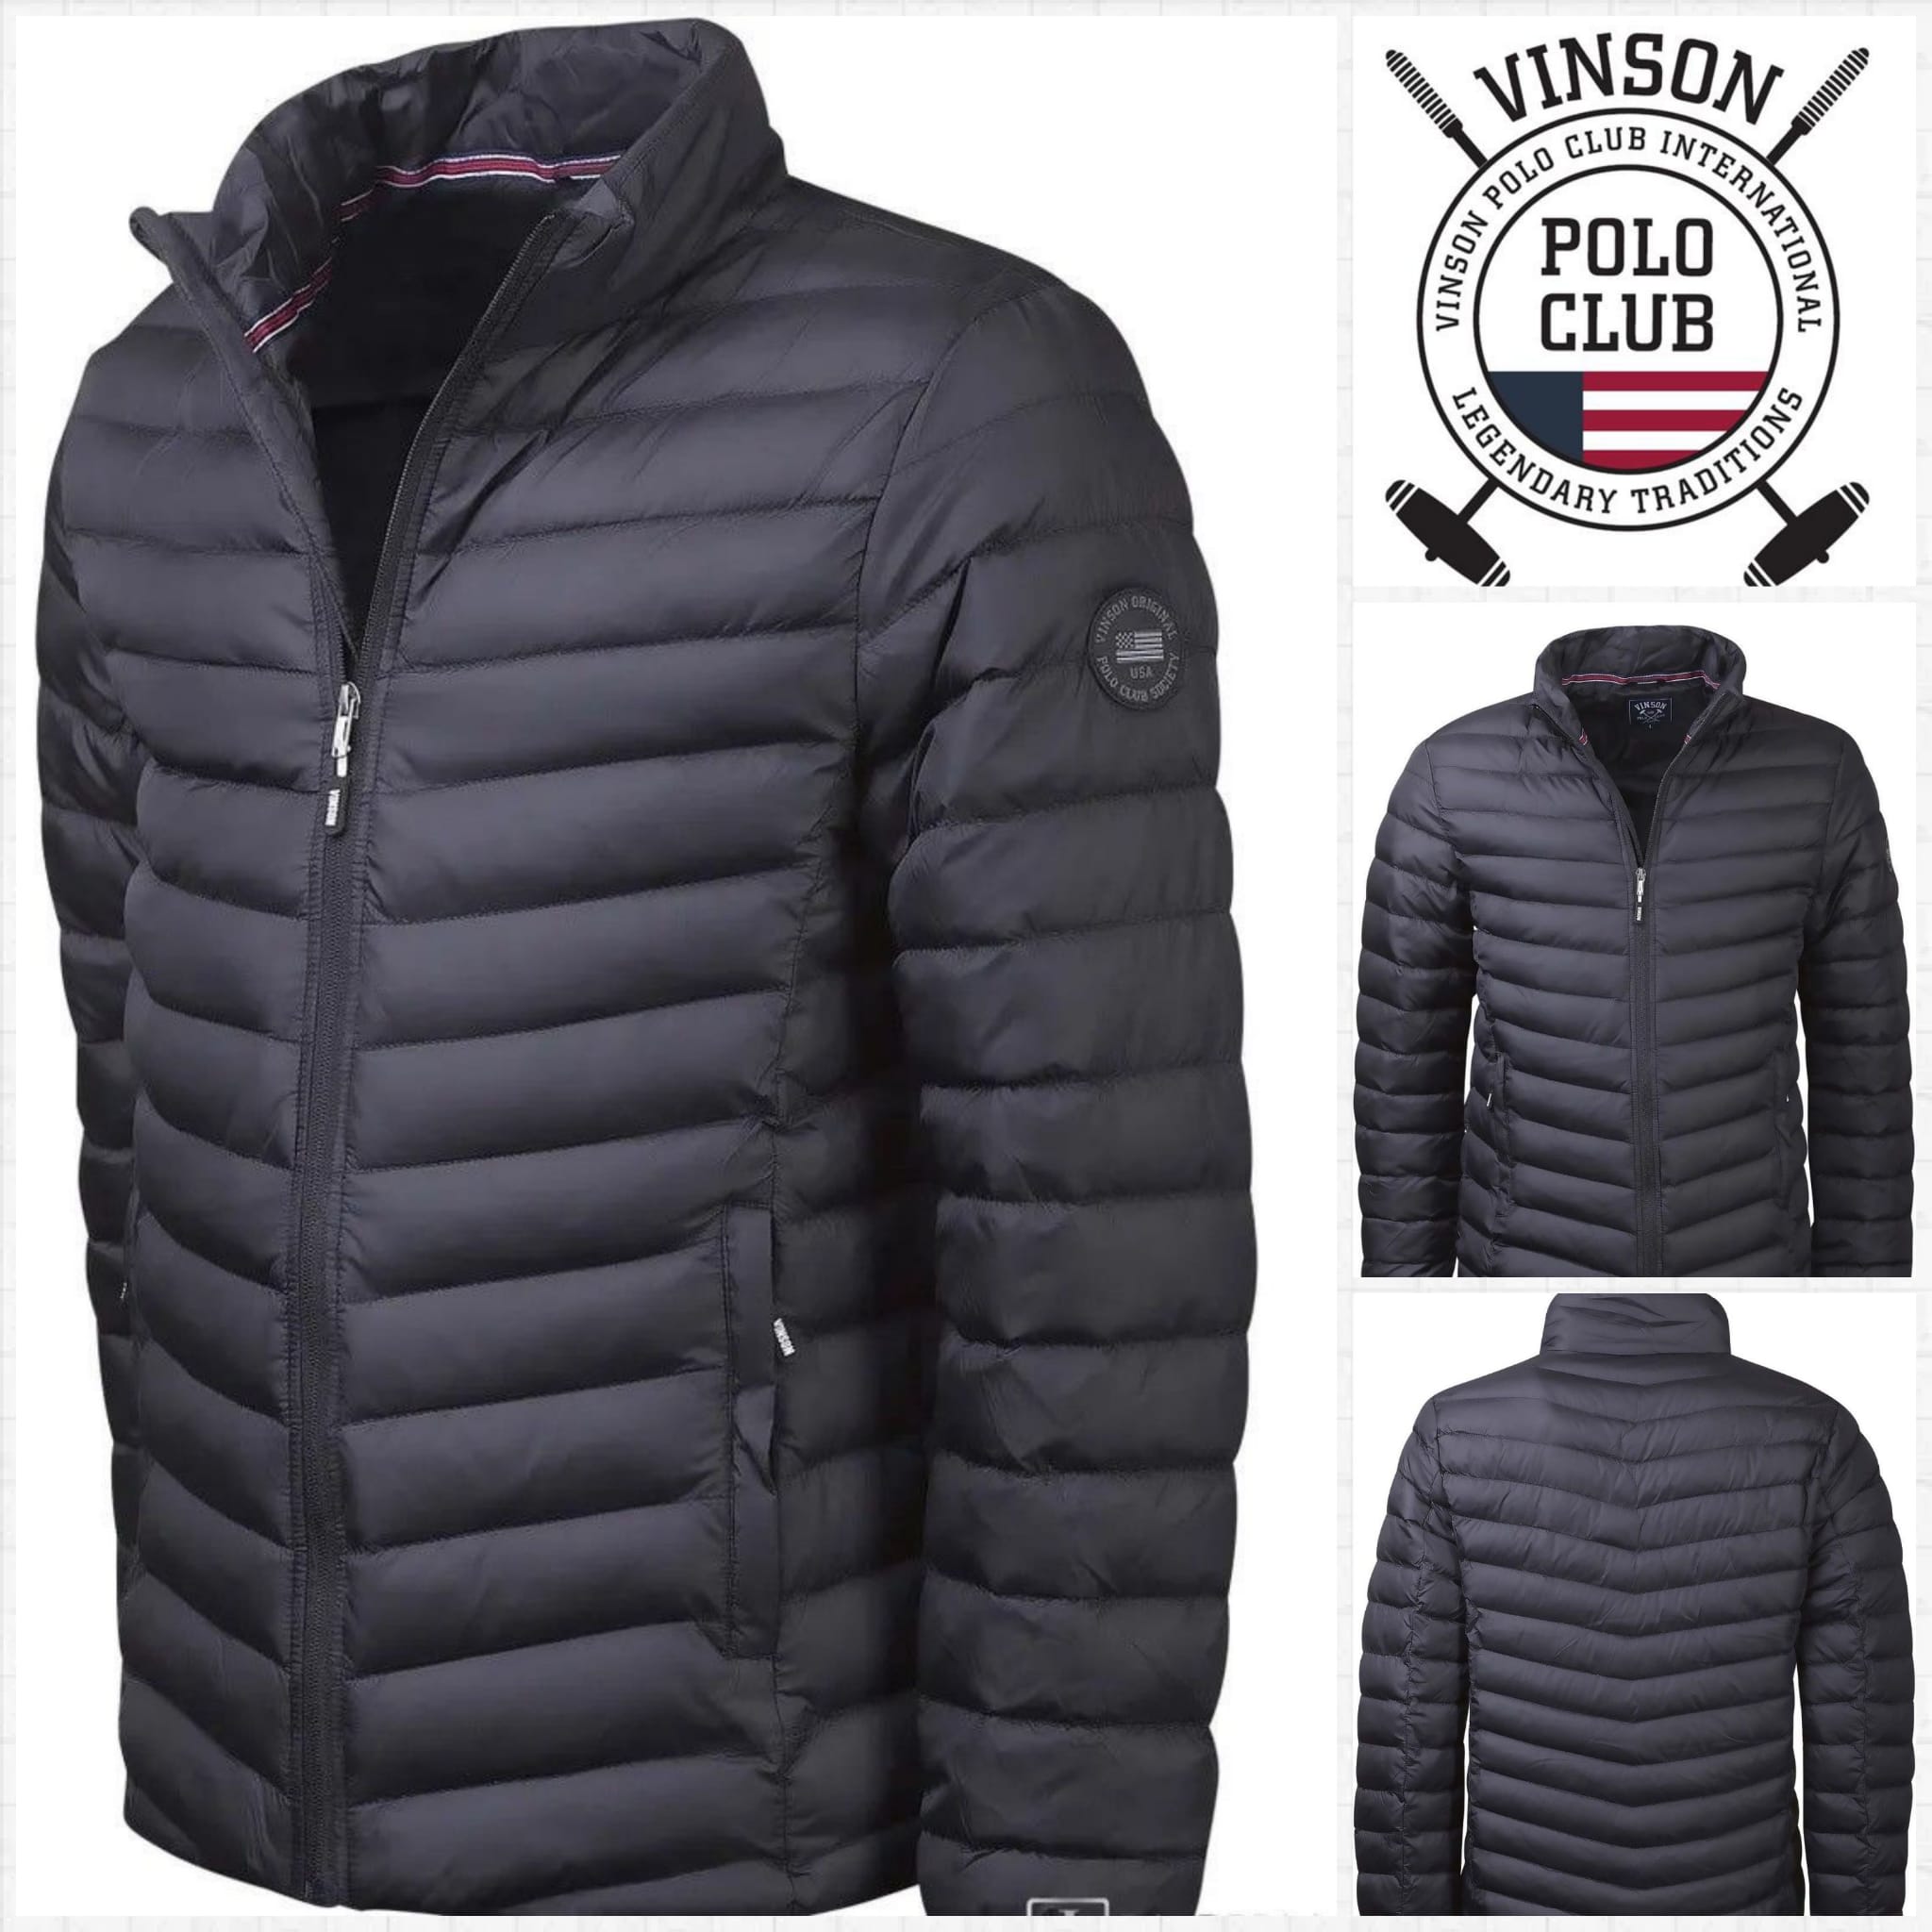 Men's Jackets from Vinson Polo Club